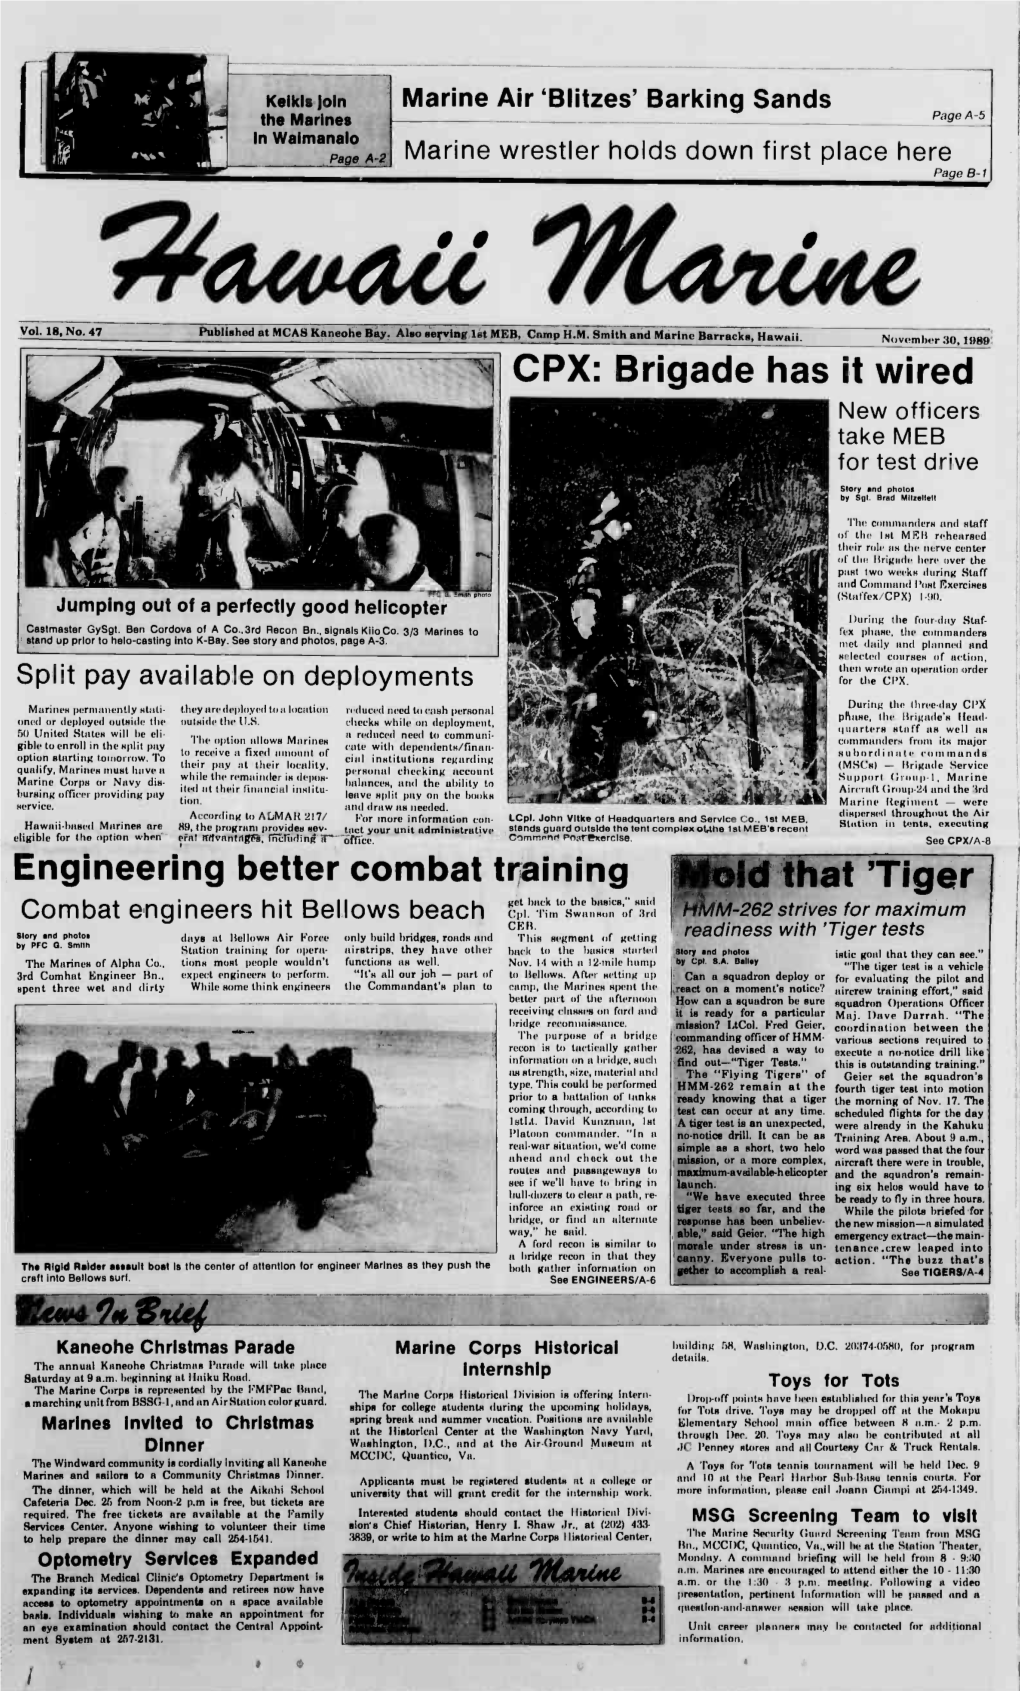 Tiger Get Back to the Basics," Said Combat Engineers Hit Bellows Beach Cpl